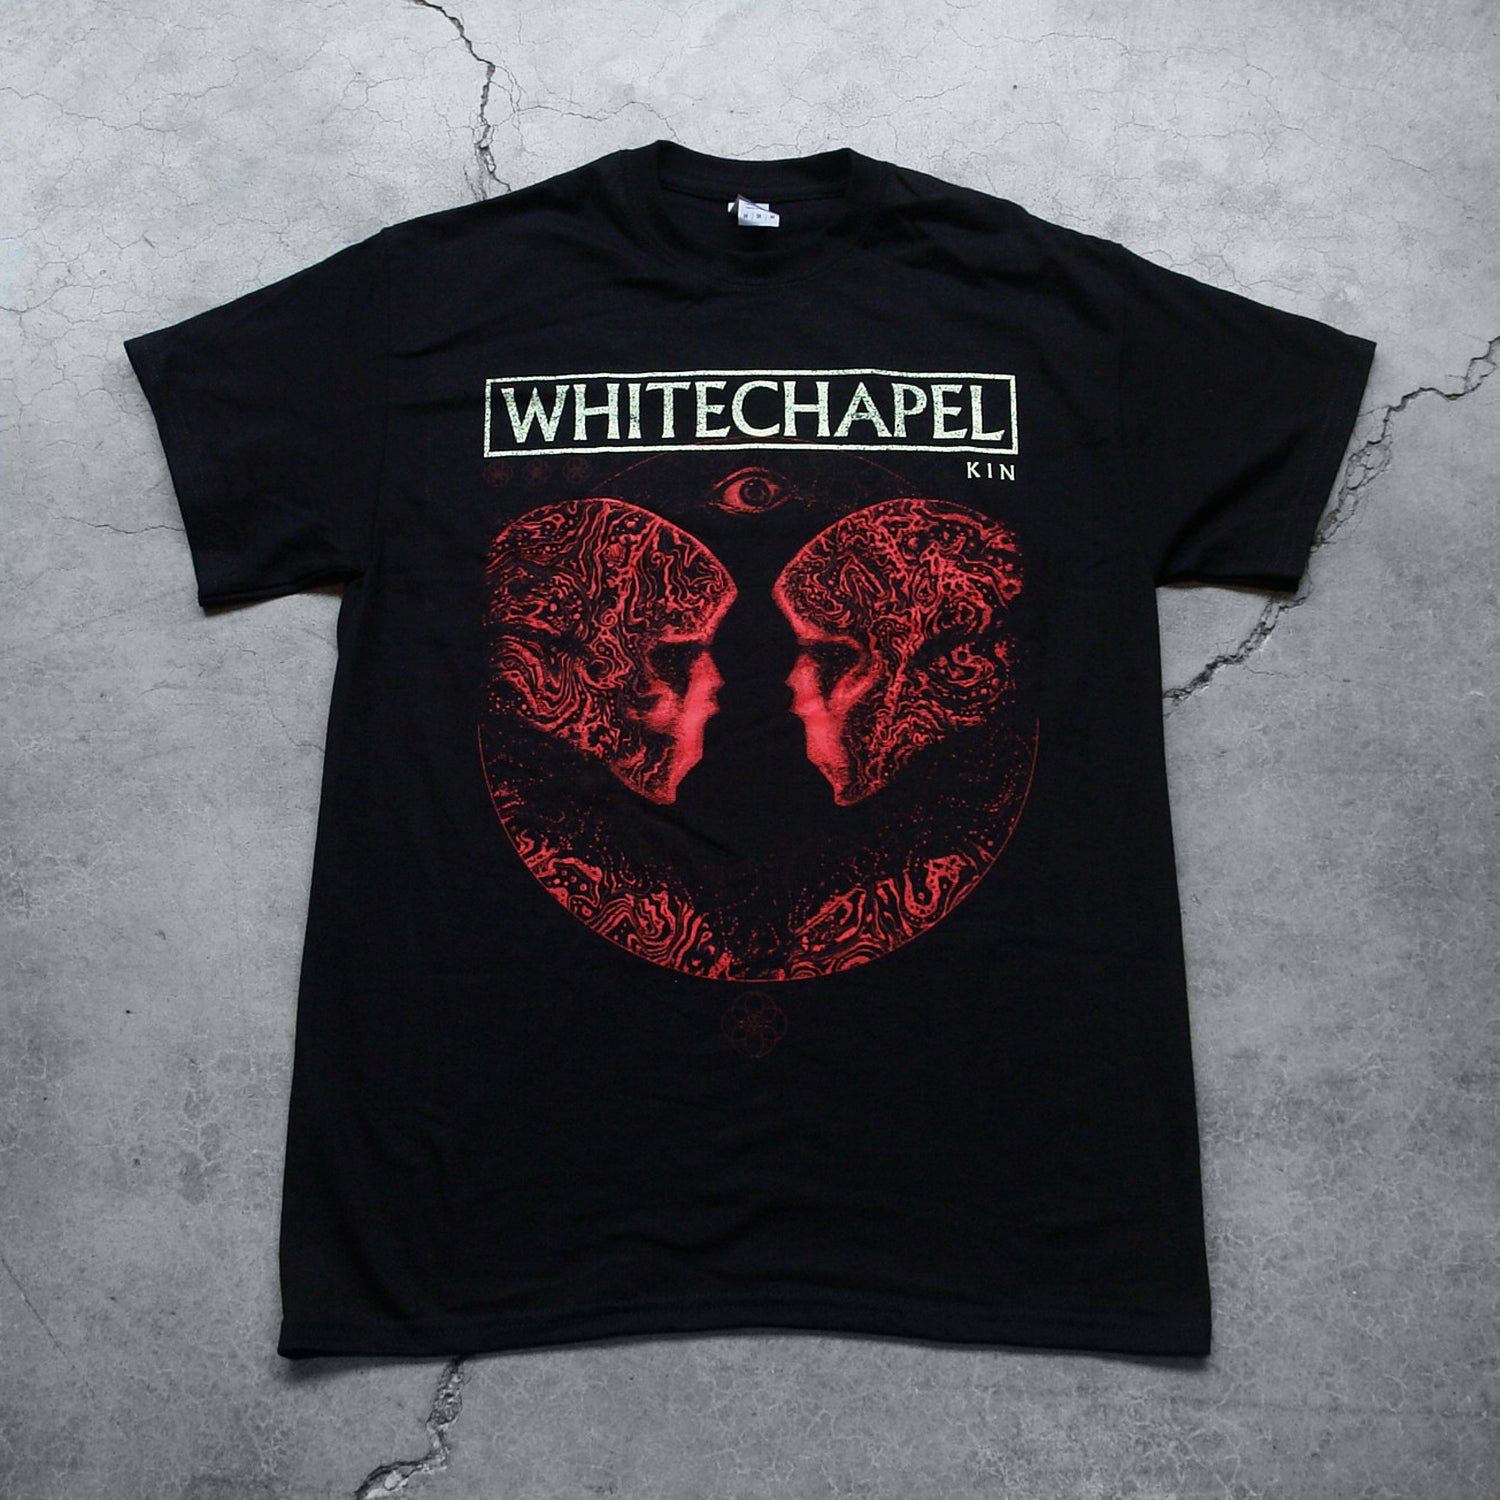 Image of the front of a black tshirt on a grey concrete background. The front shows two skulls/skeletal figures from the shoulders up looking at one another- made up of red and black oil. This is outlined in a thin semi circle. Above the heads of the skulls is a red opened eye. Above this in white text with a white rectangular outline is the word 